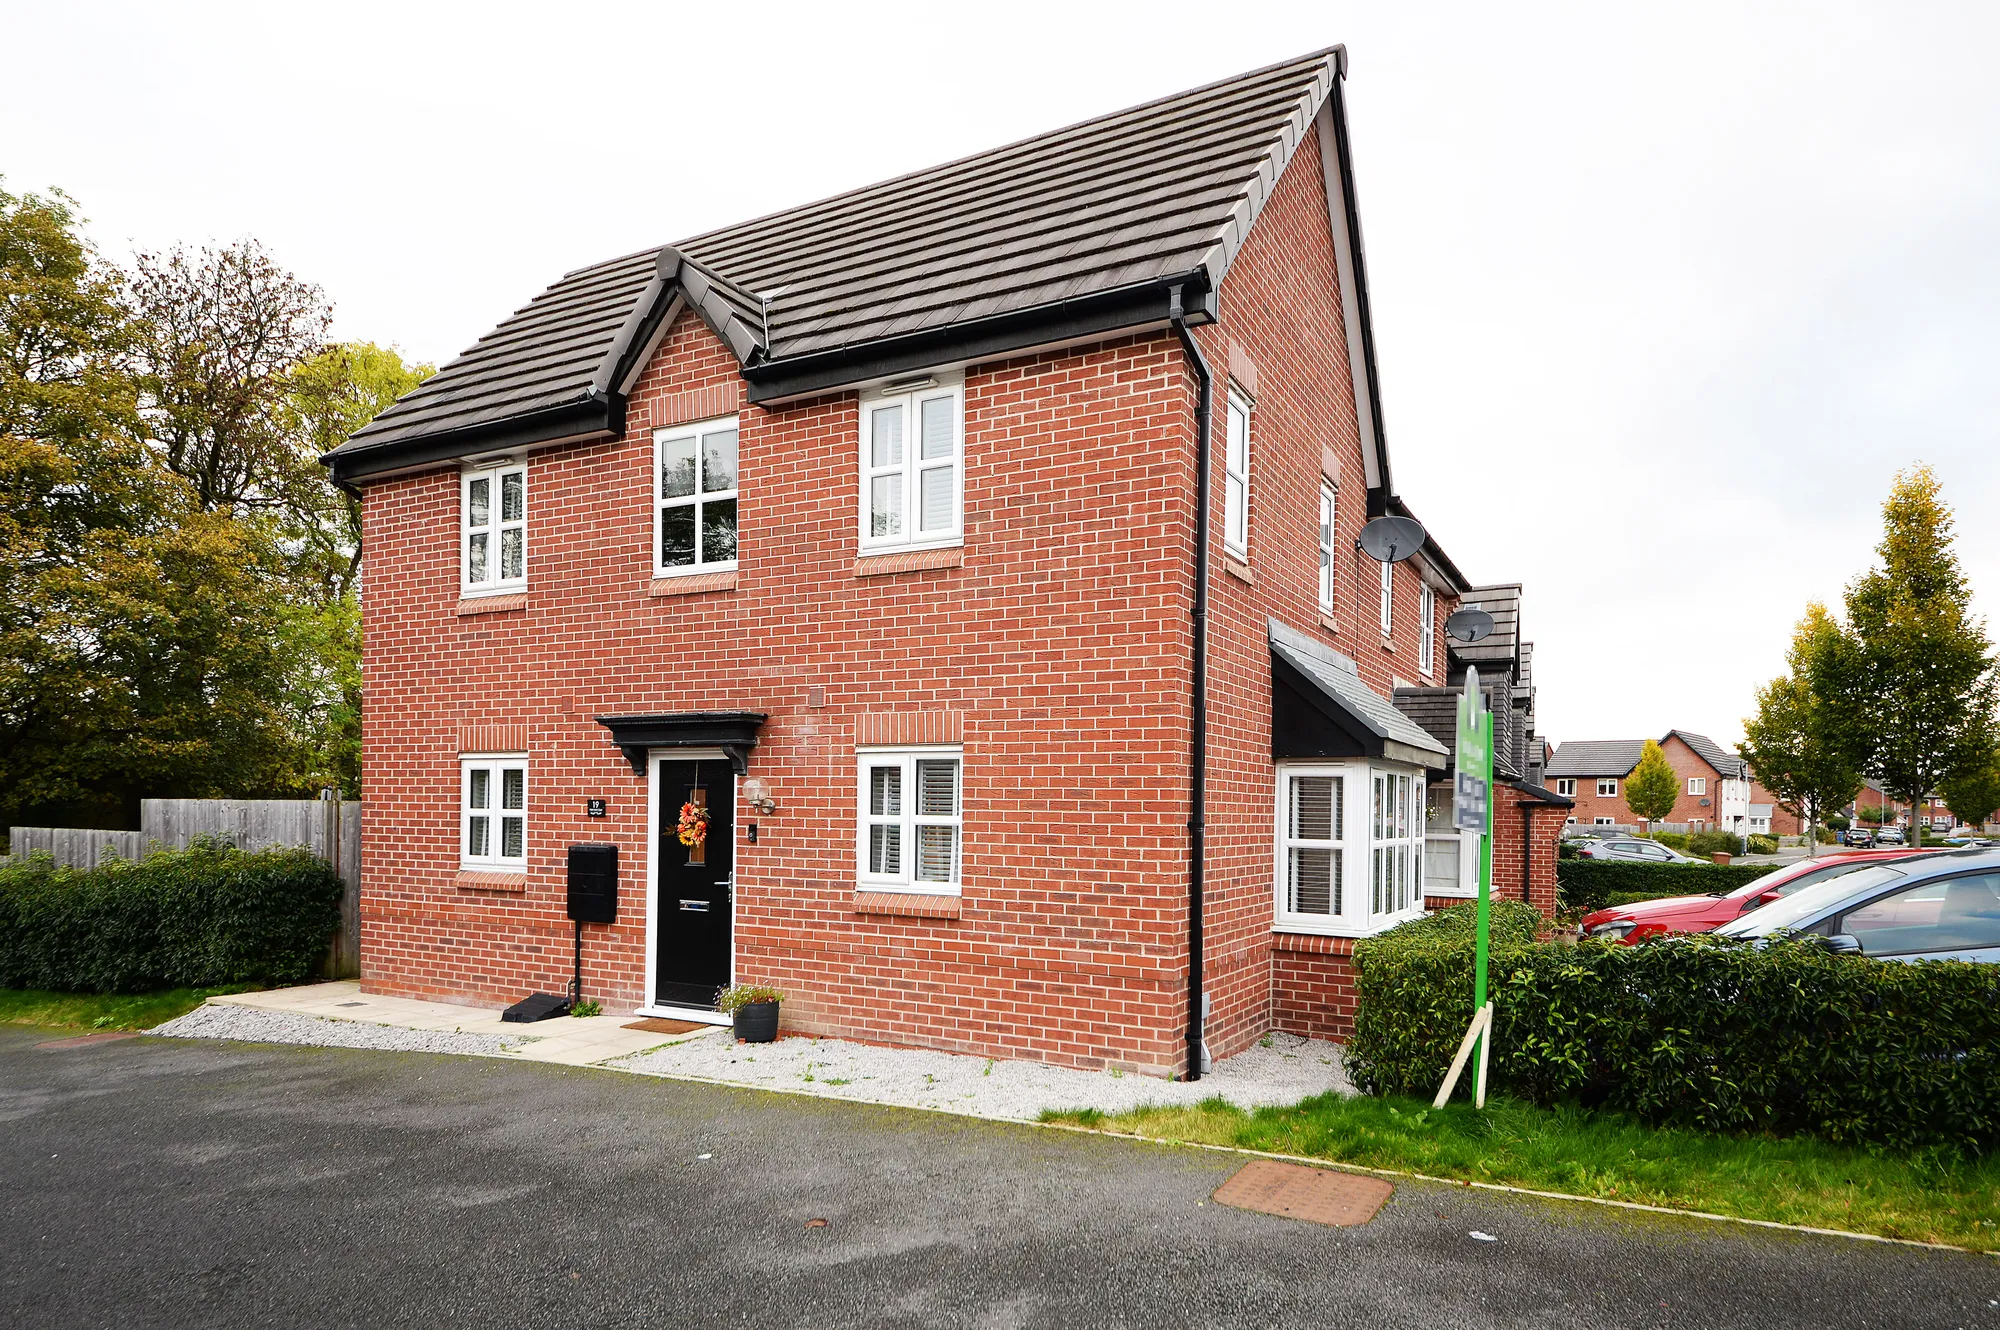 3 bed semi-detached house for sale in Peak Forest Close, Hyde - Property Image 1